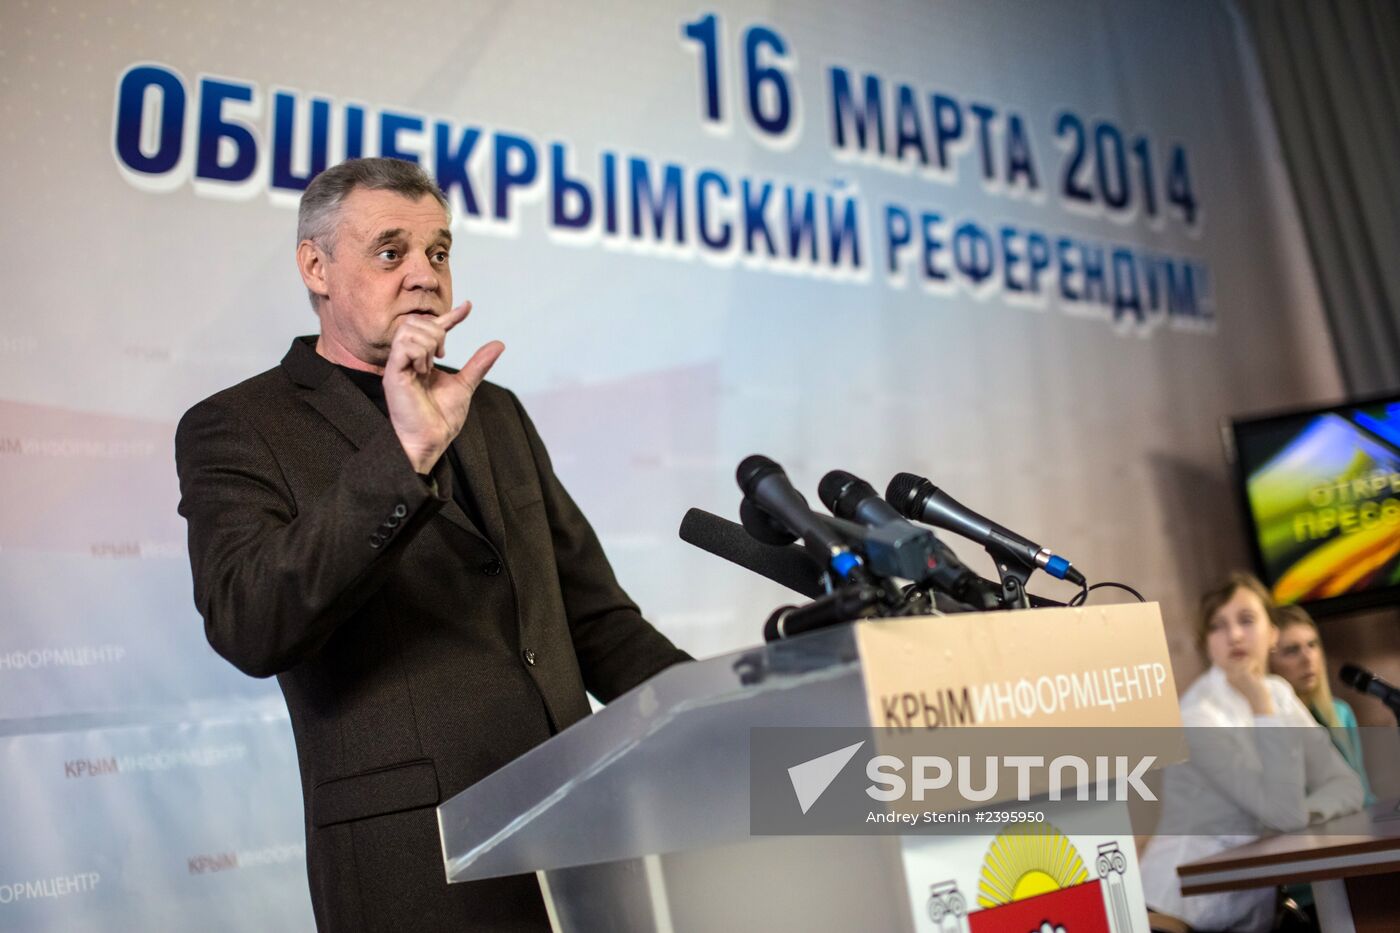 Mikhauil Malyshev, head of Crimean stratus referendum committee, gives press conference